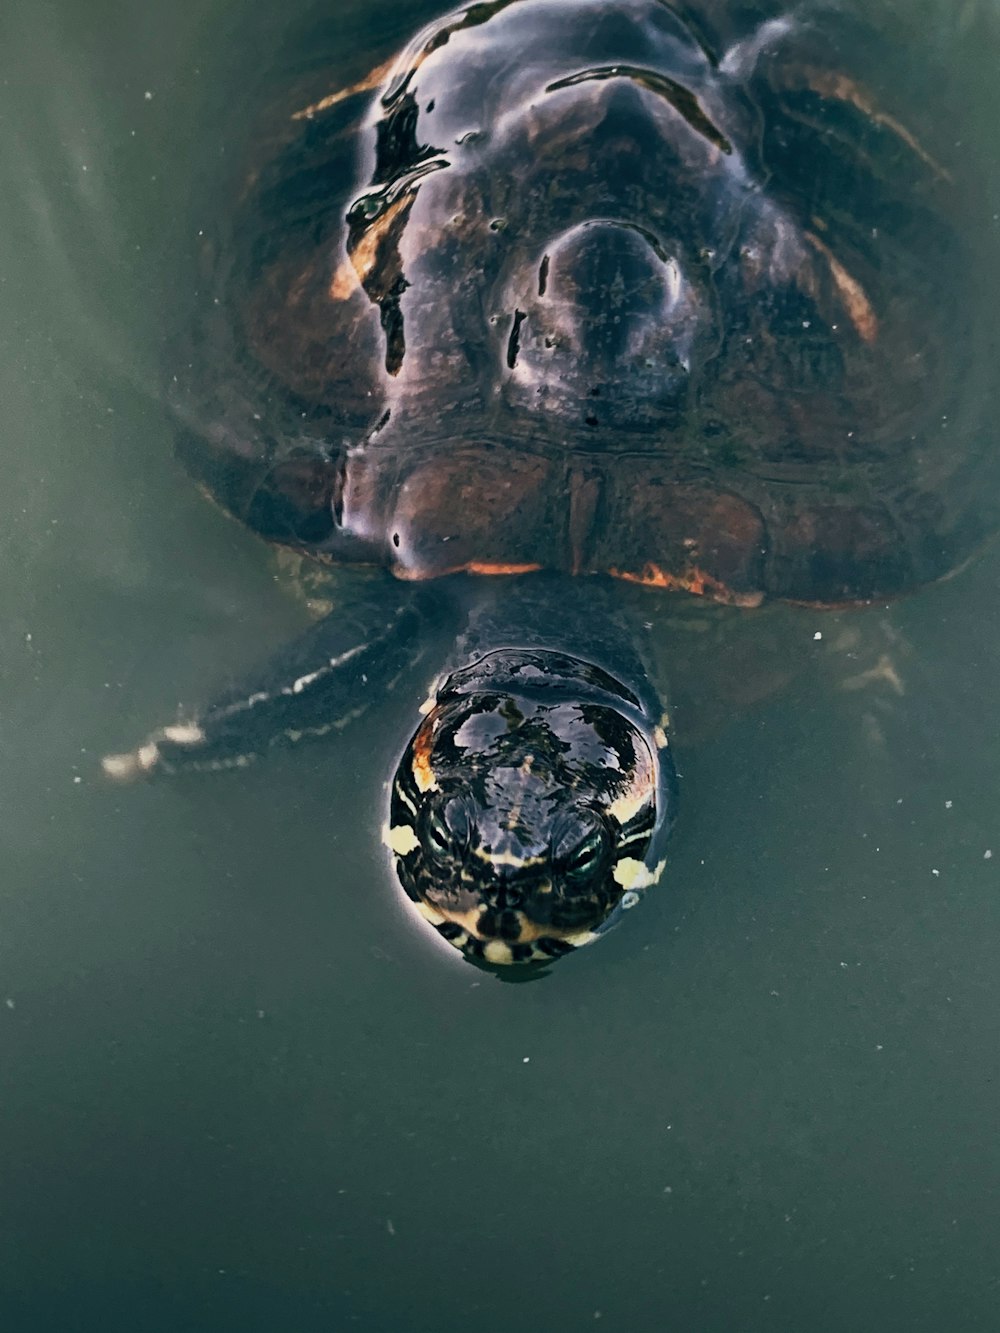 orange and black turtle in water